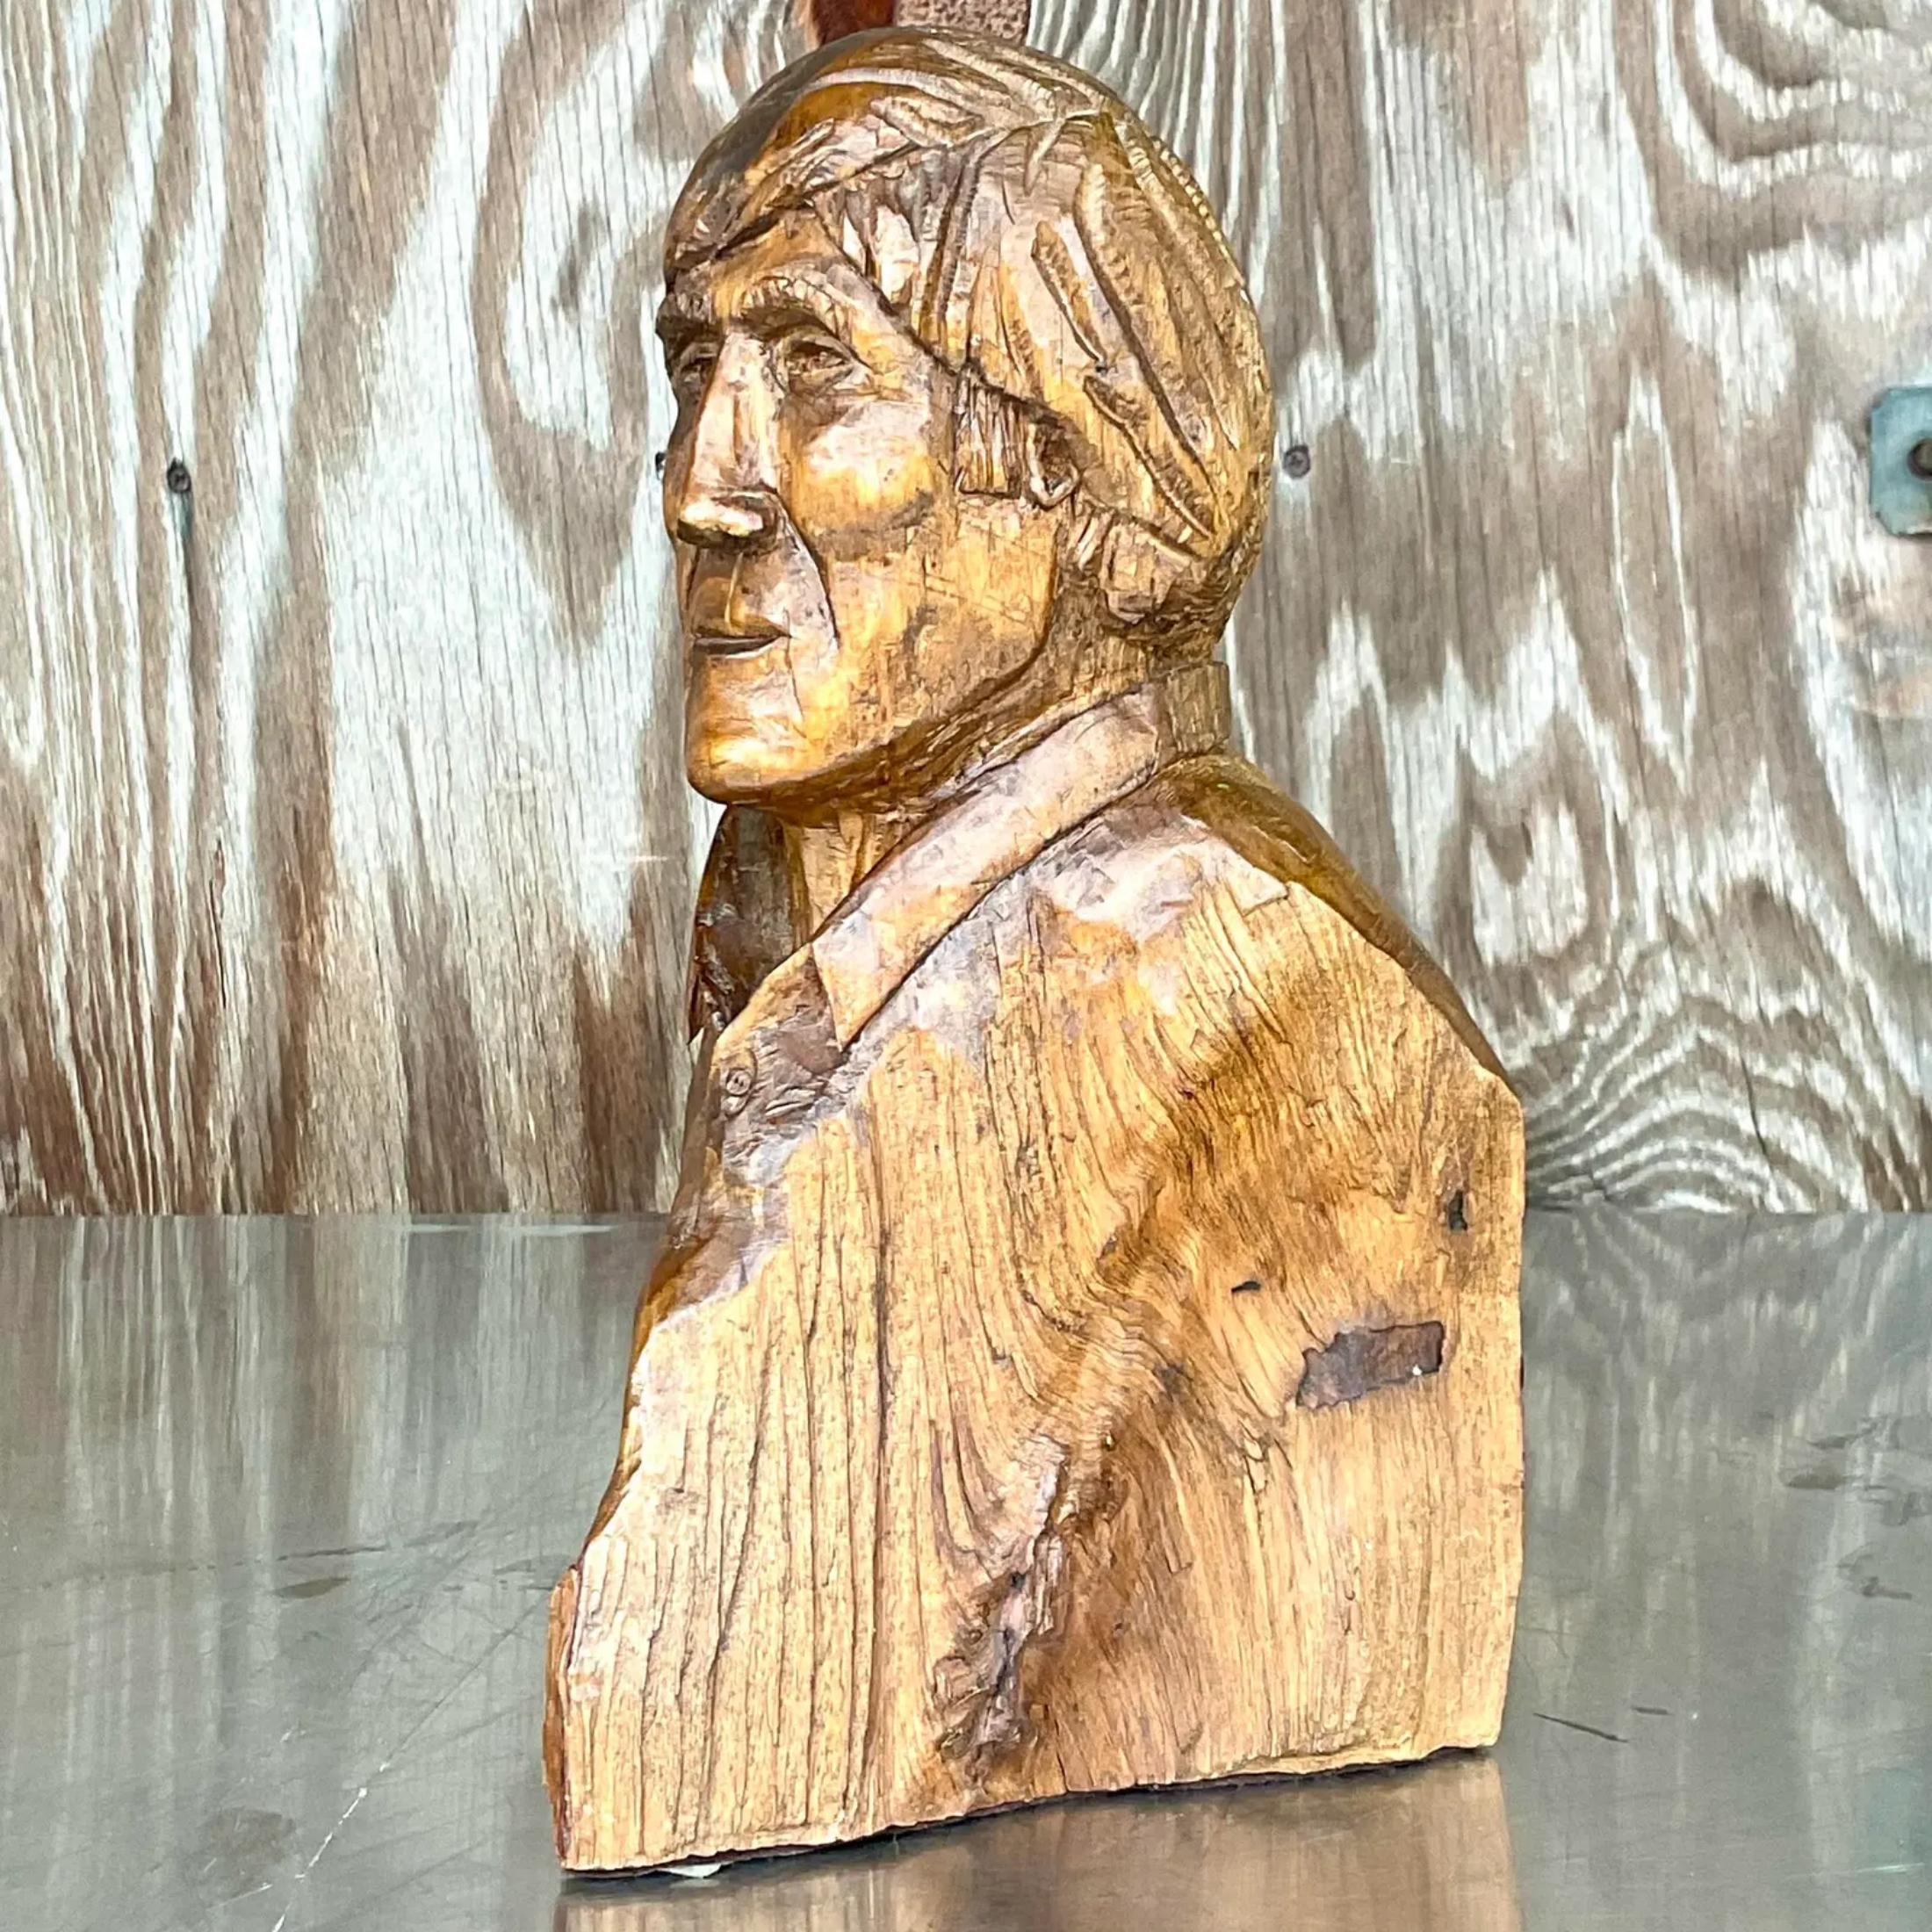 Vintage Boho sculpture of man. Hand carved with beautiful wood grain detail. Done by the artist Michael S. Wilson. Acquired from a Palm Beach estate. 